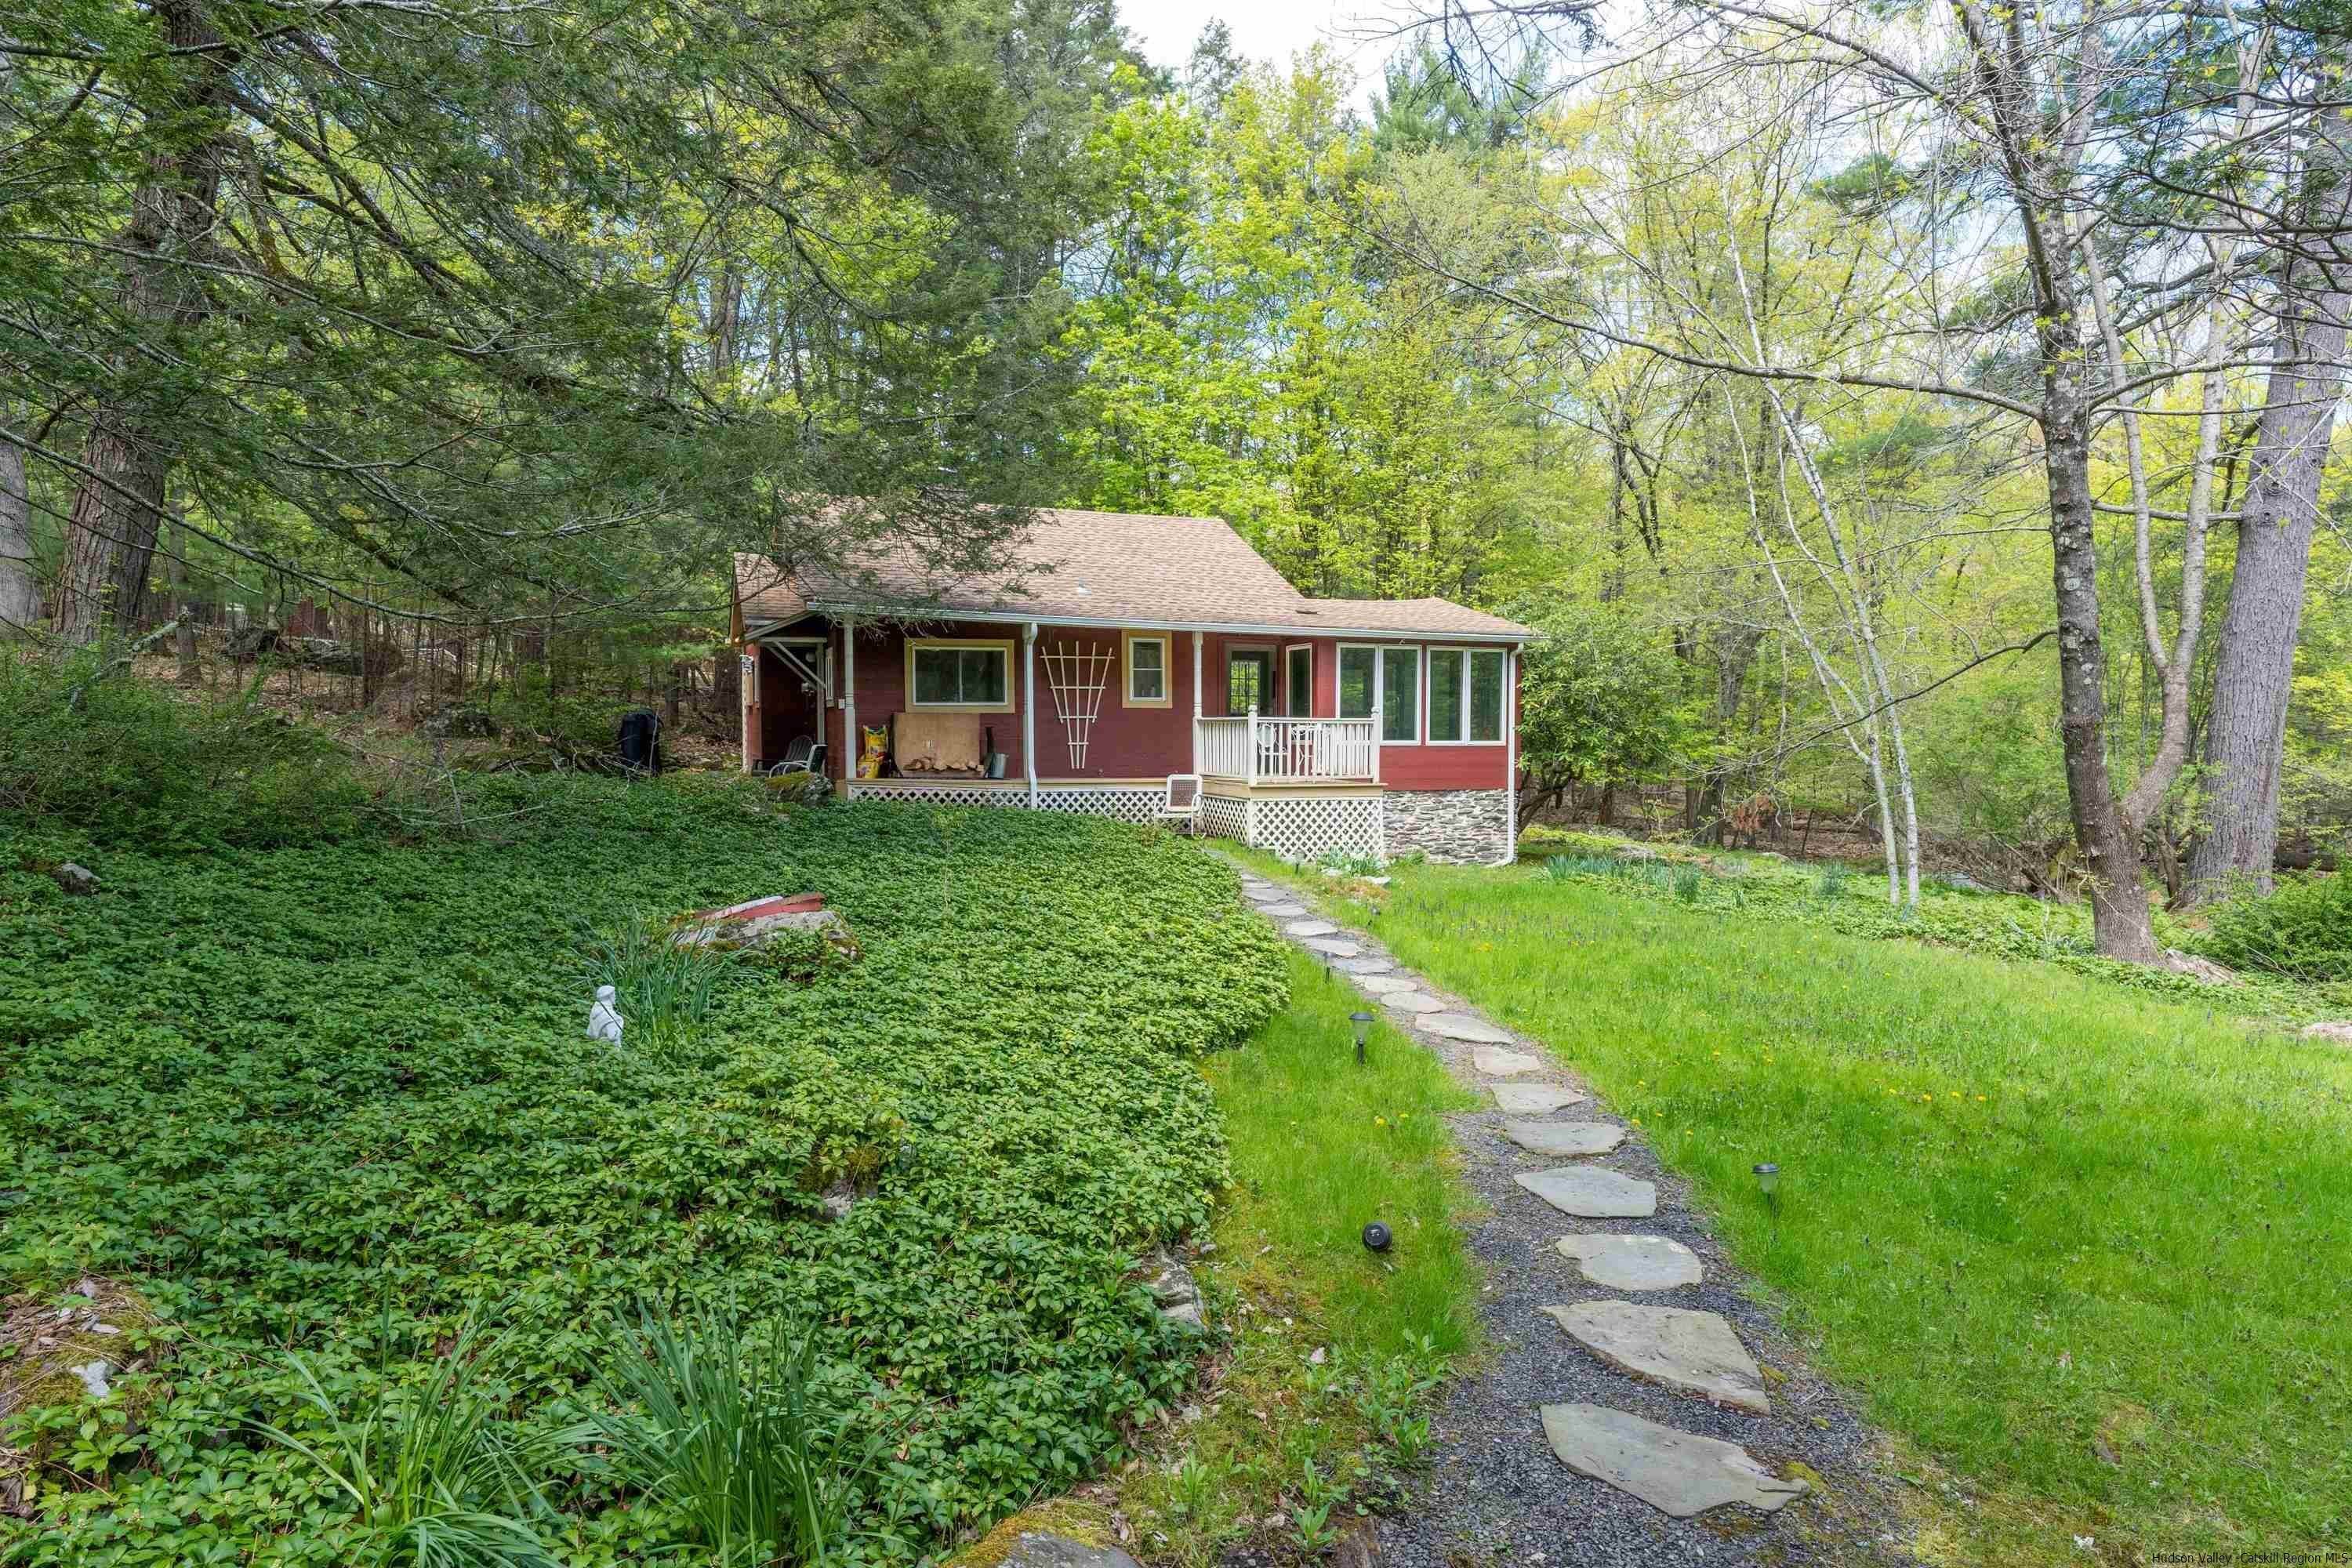 18. Two Family for Sale at 72-74 Speare Road Woodstock, New York 12498 United States